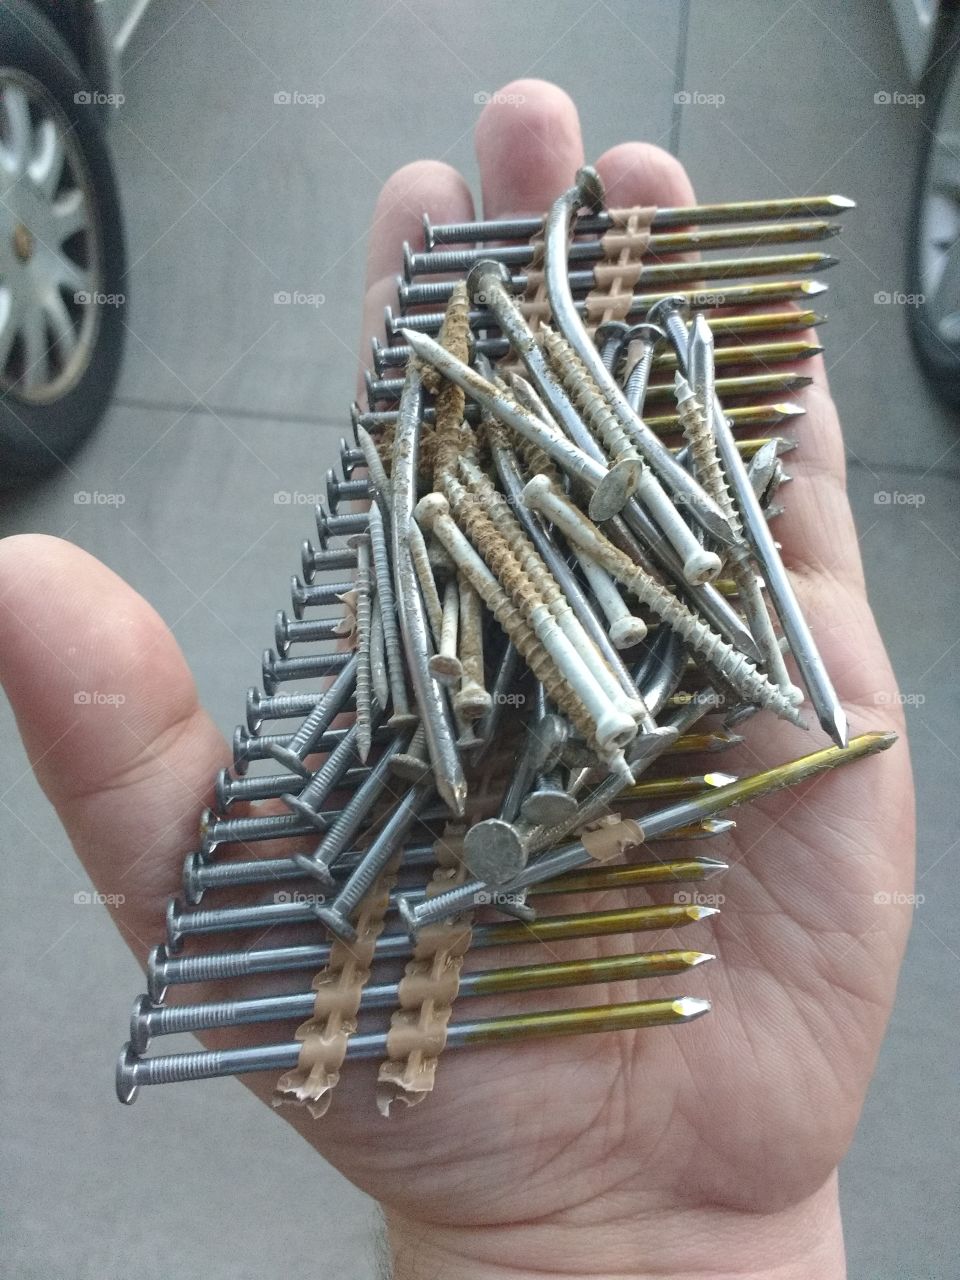 nails found in the road near our house.